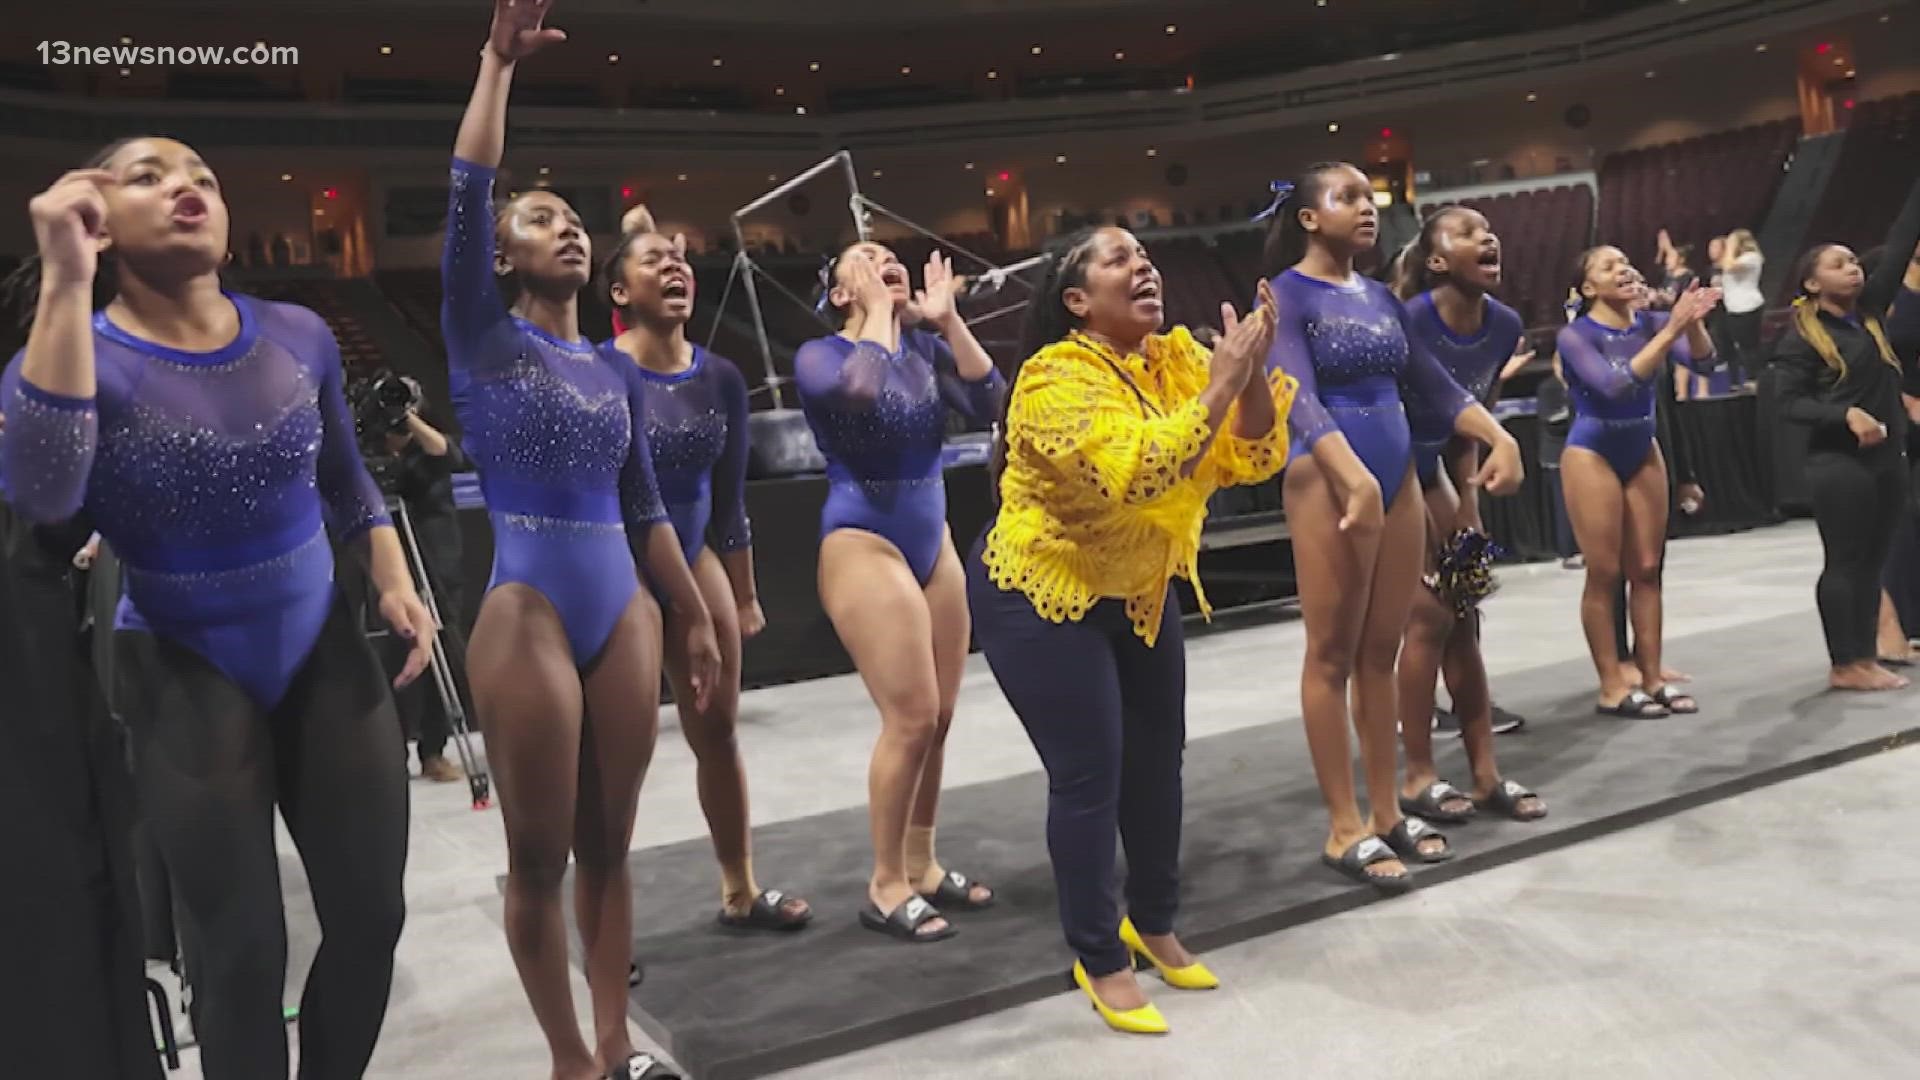 Fisk University is the first HBCU to have a gymnastics team compete at the NCAA level.